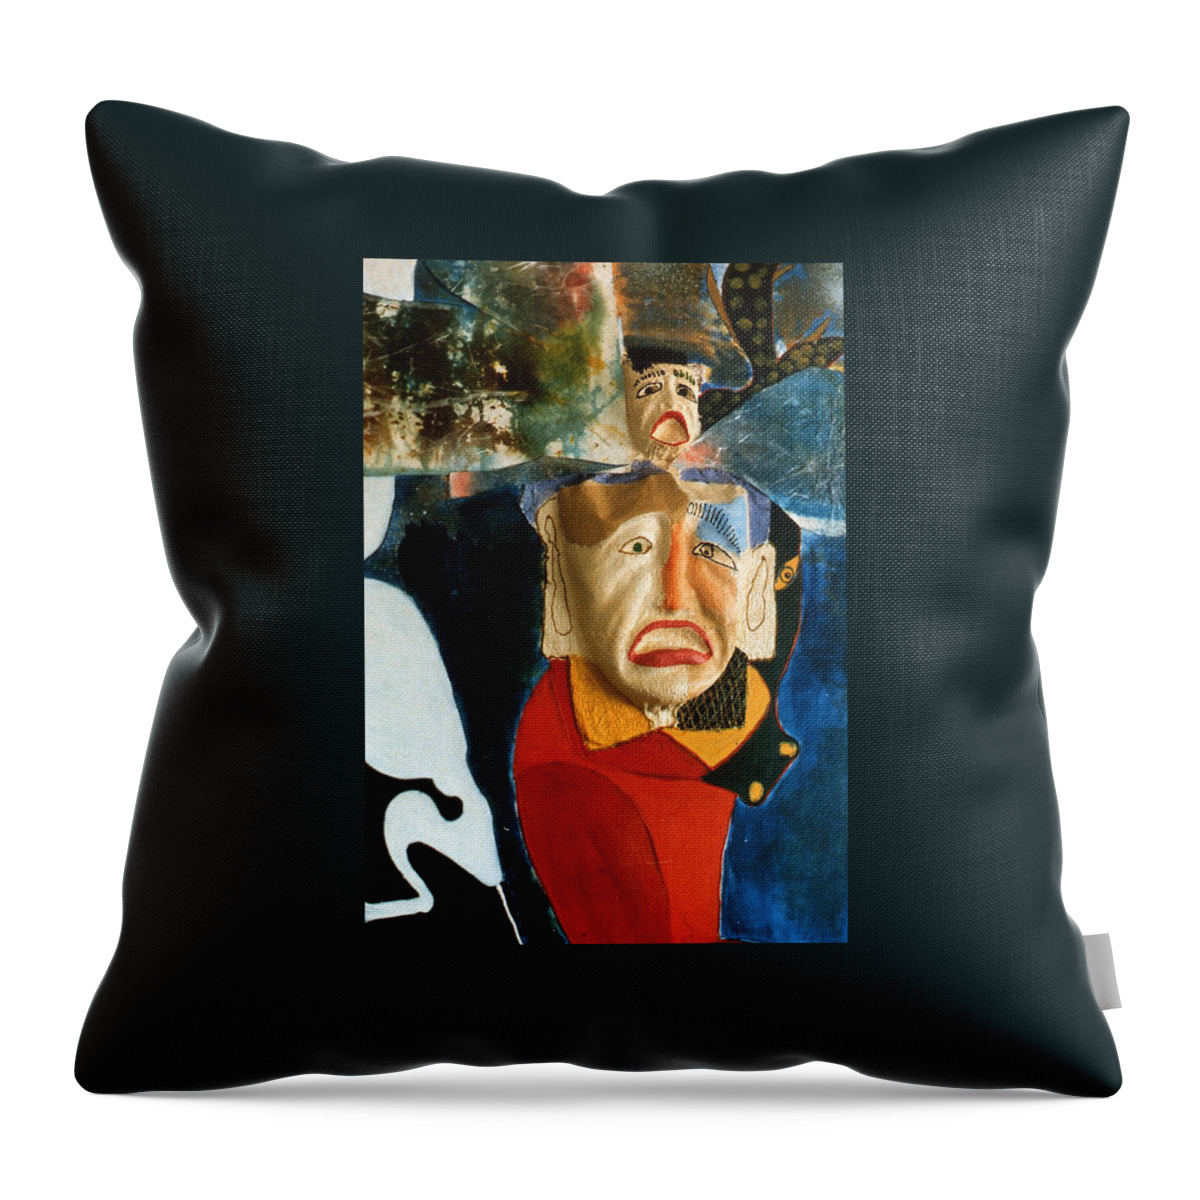 Abstract Throw Pillow featuring the painting King In Peace by Sima Amid Wewetzer